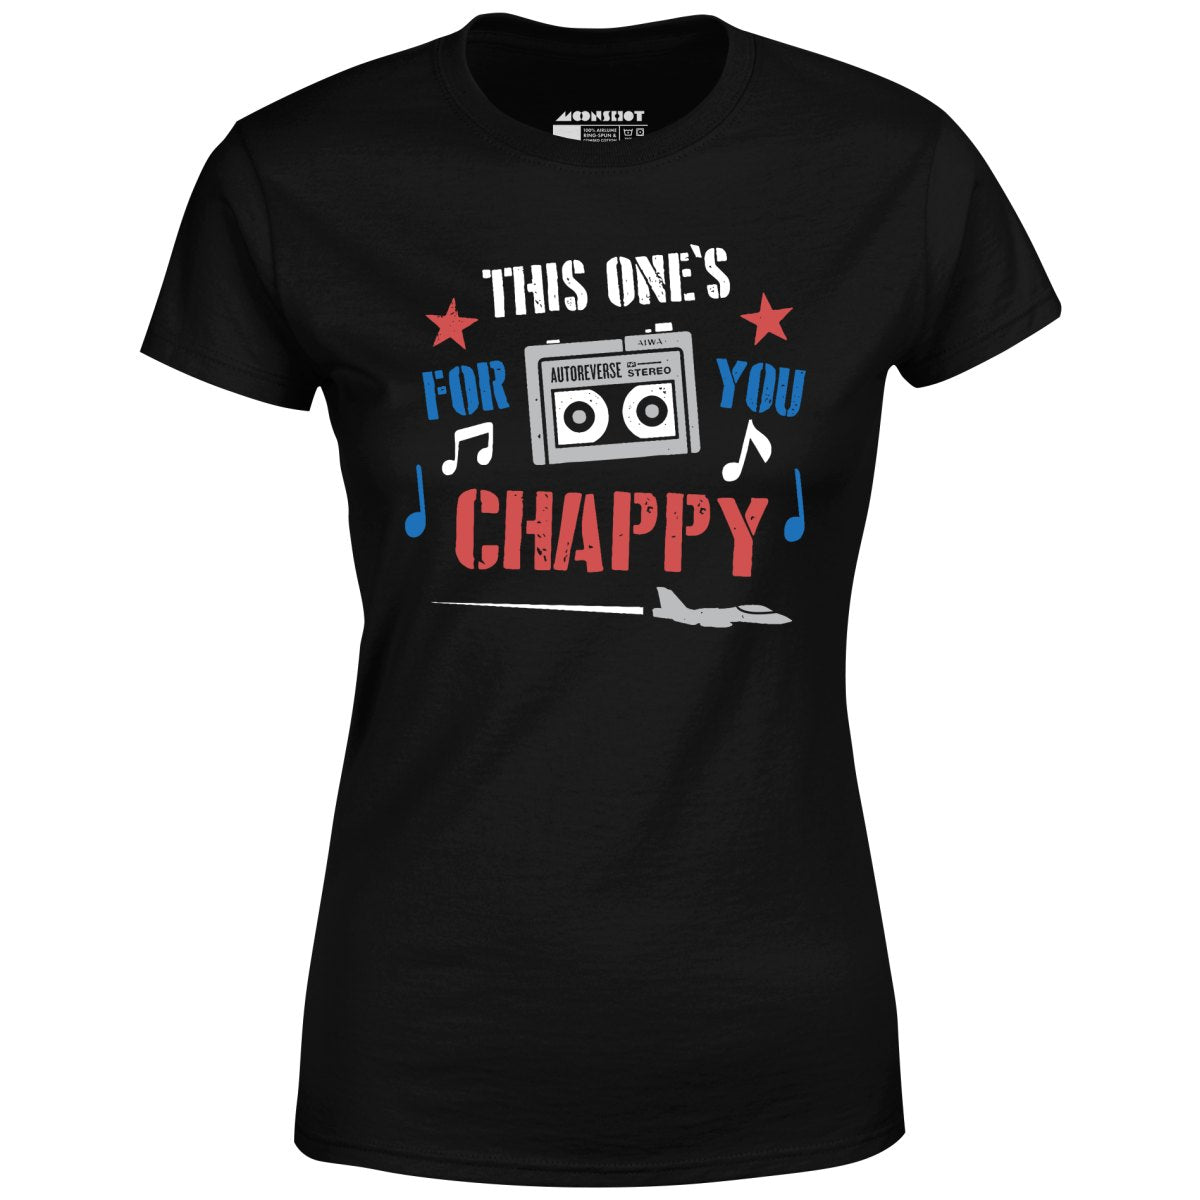 This One's For You Chappy - Iron Eagle - Women's T-Shirt